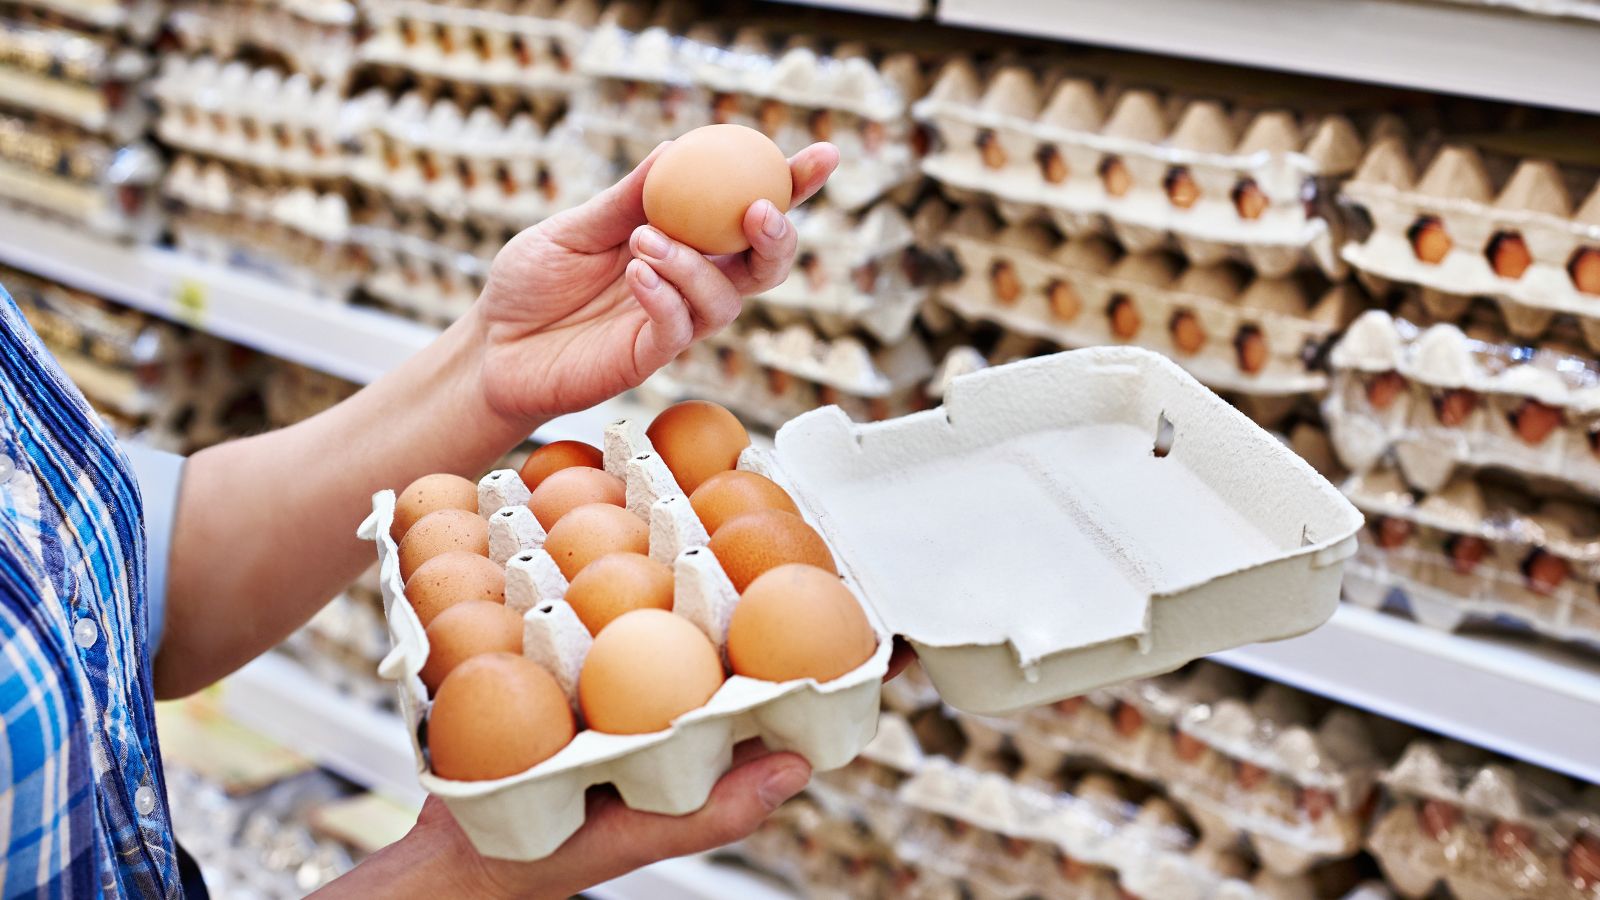 <p>Egg enthusiasts can rejoice, as prices for eggs are anticipated to drop significantly. This 14.7% decrease in cost makes eggs an even more economical protein choice for meals and baking.</p>